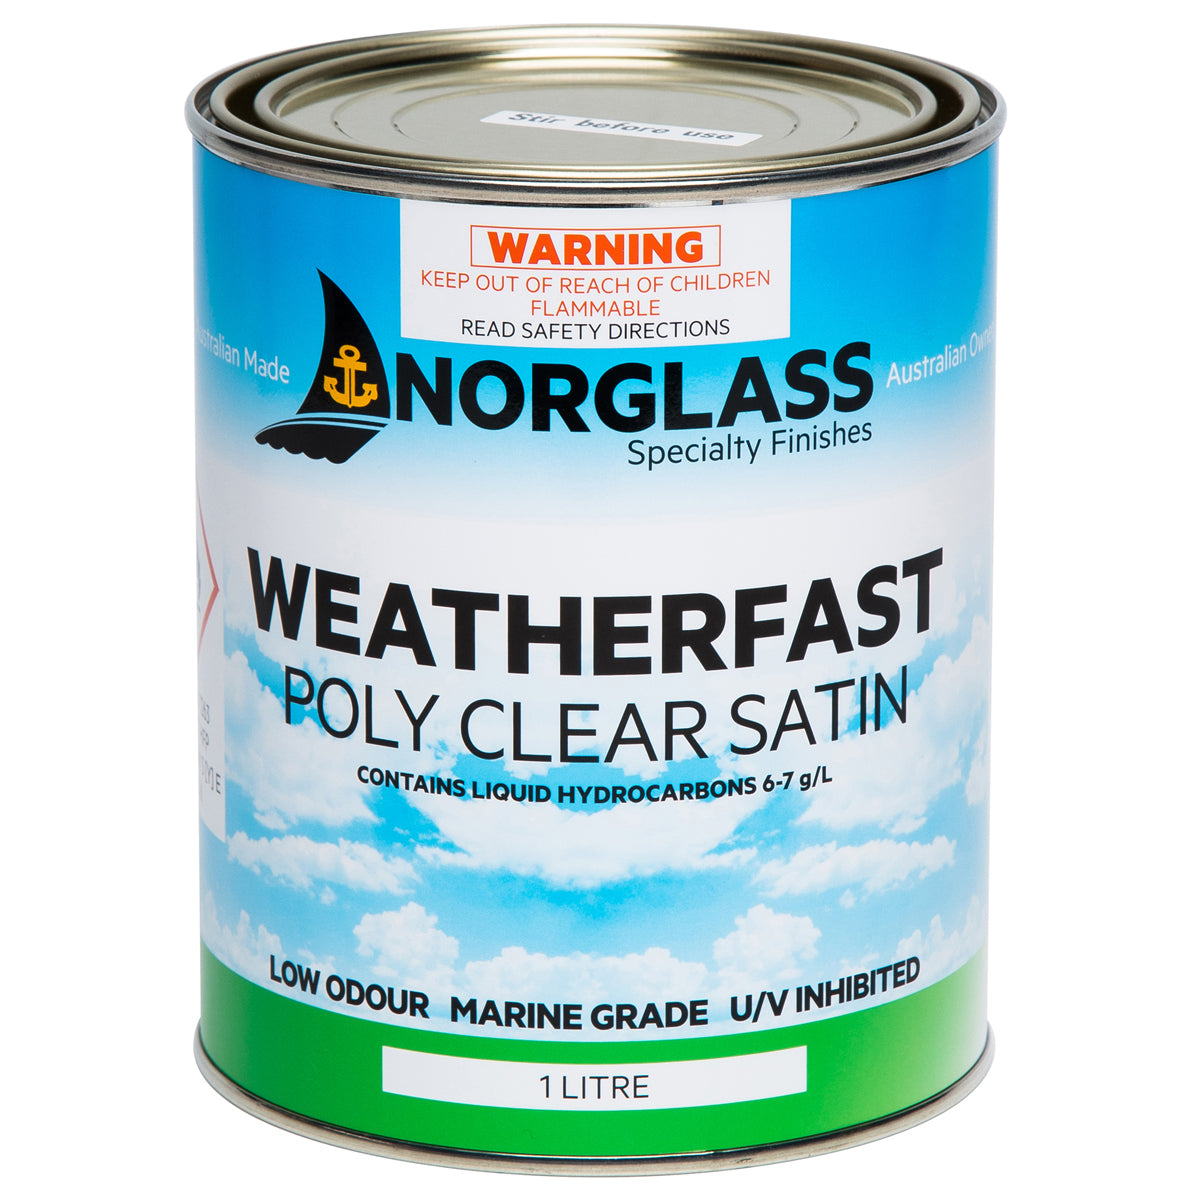 Norglass Weatherfast Poly Clear SATIN